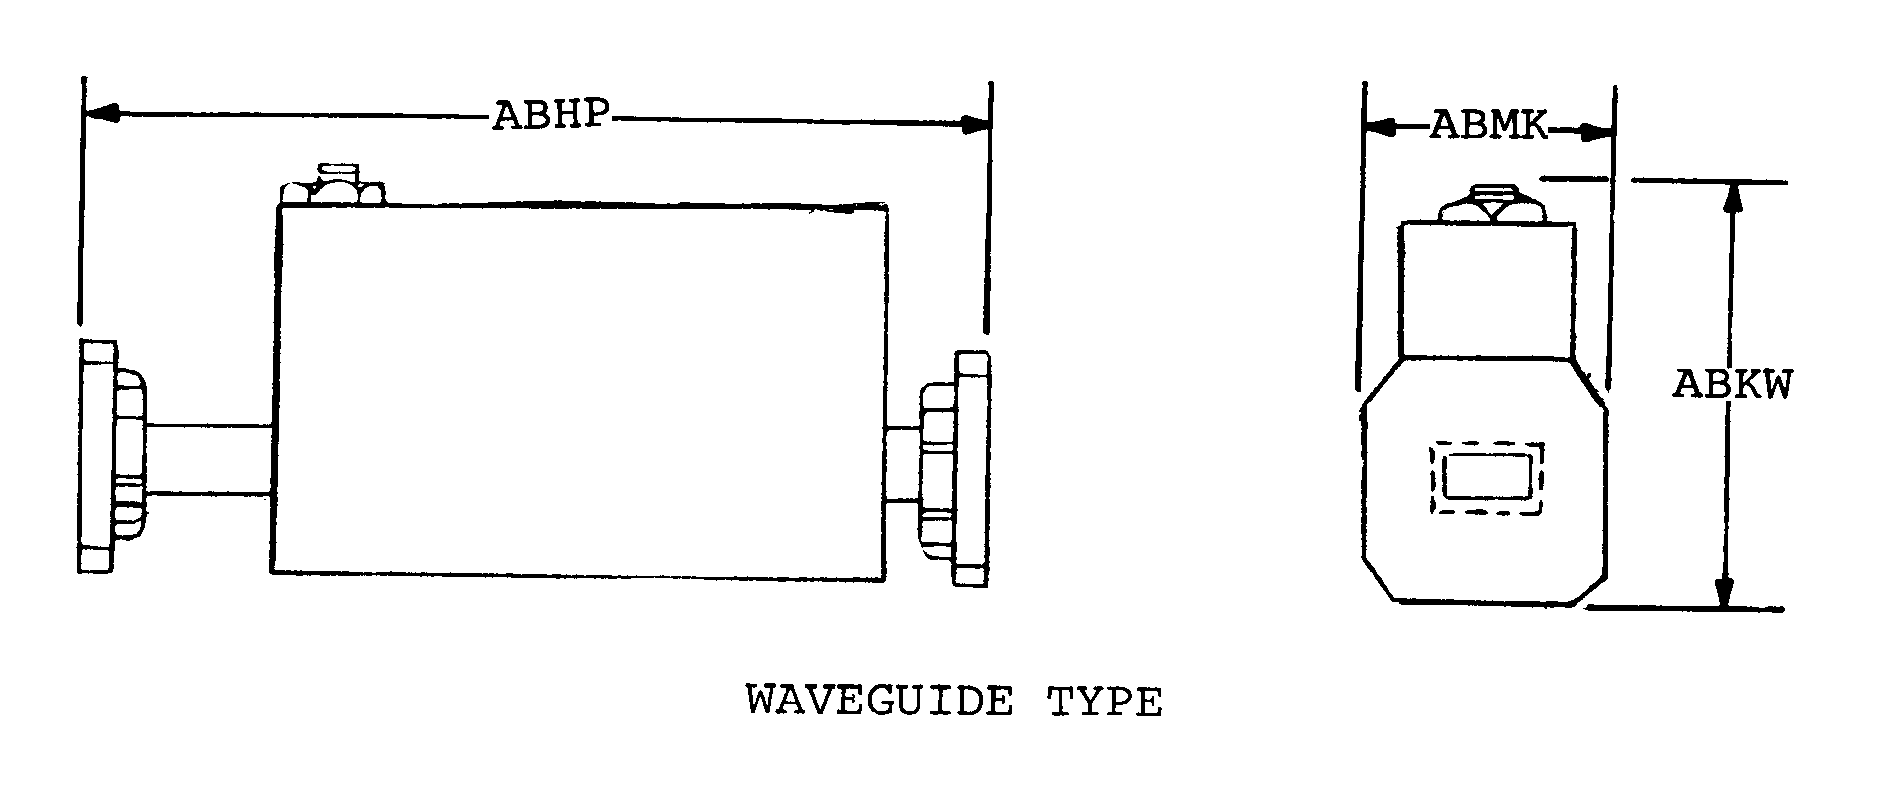 WAVEGUIDE TYPE style nsn 5985-01-050-6788